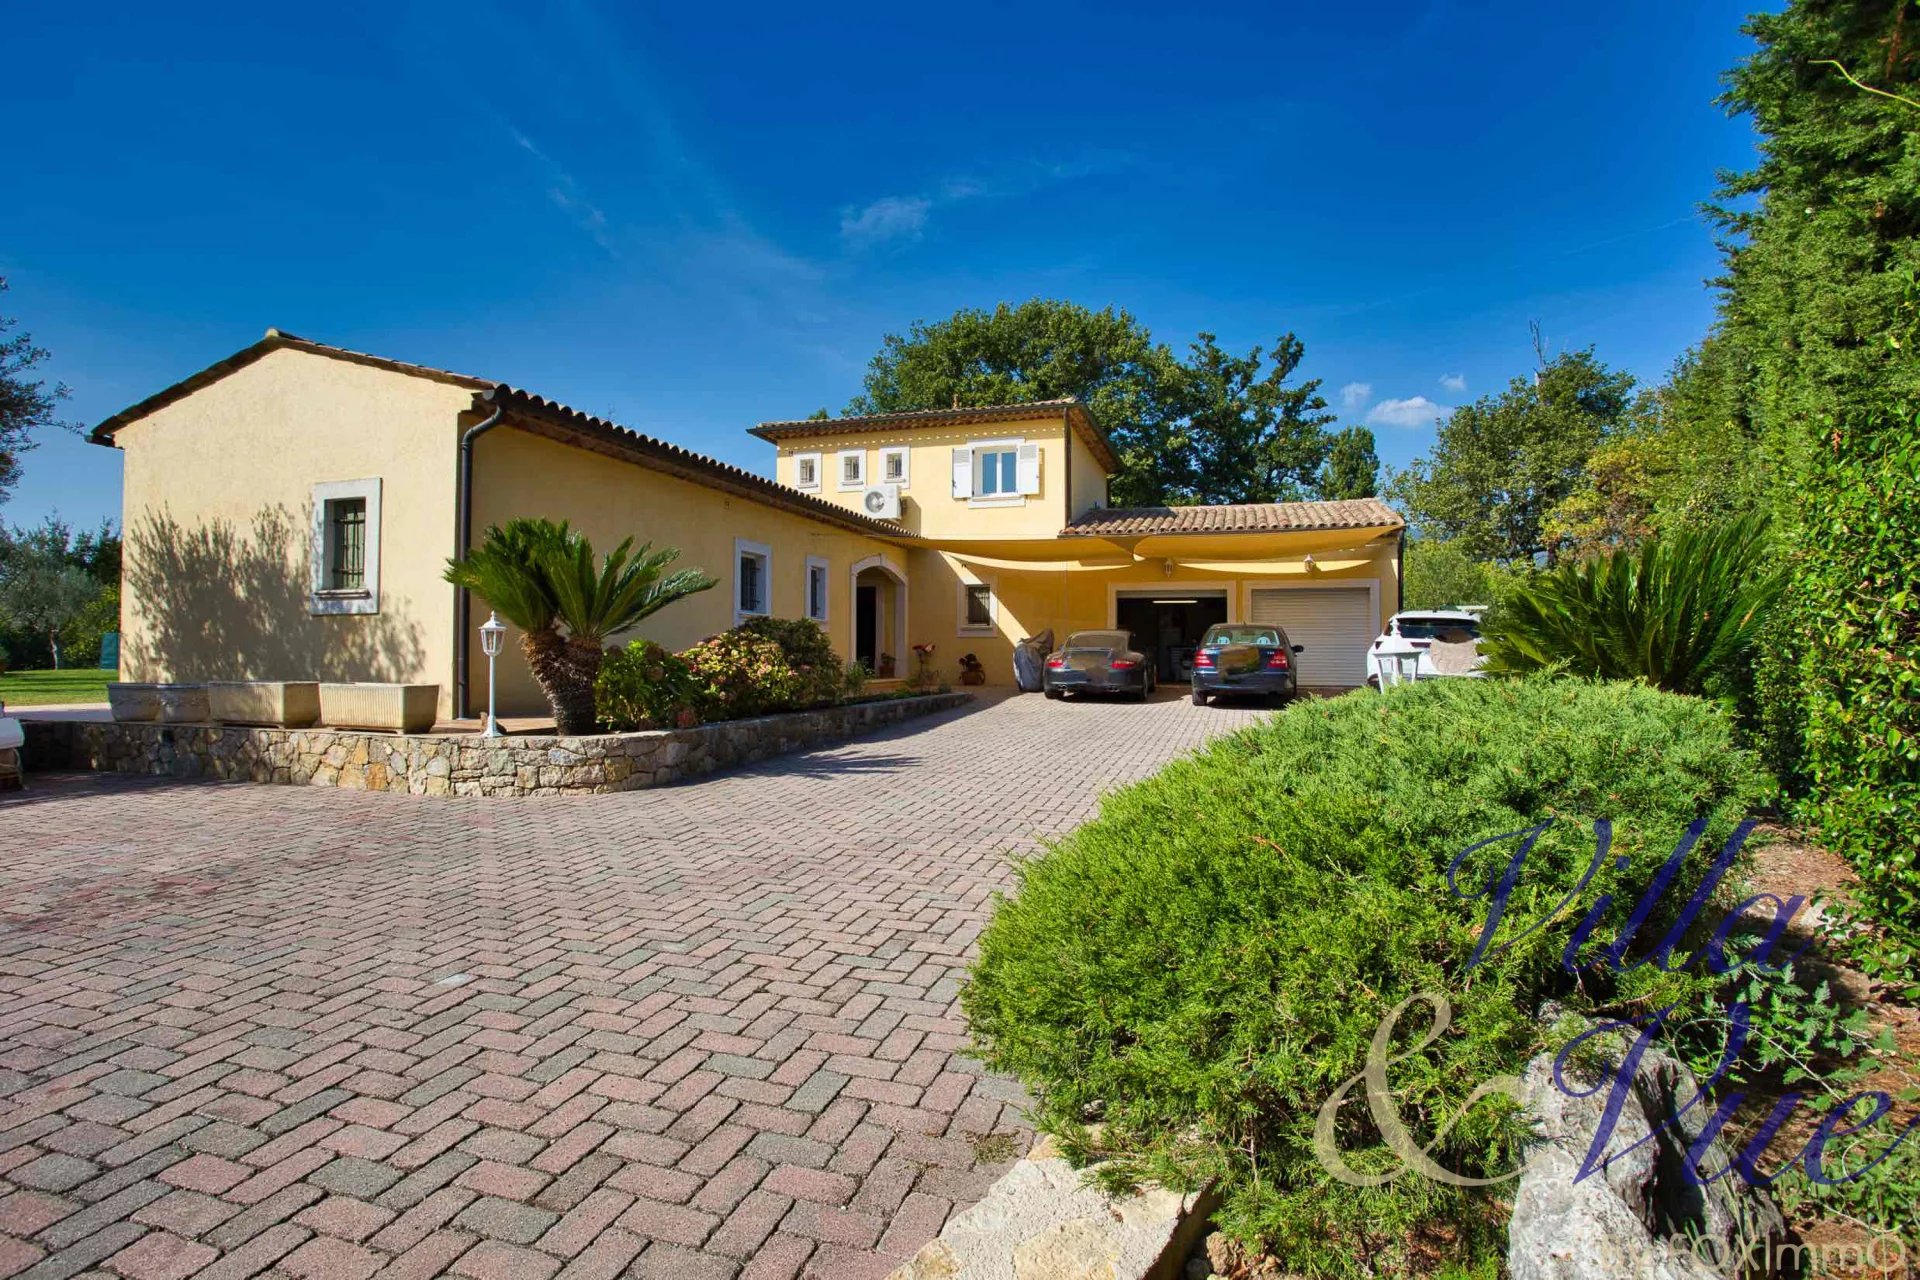 For sale beautiful villa in absolute calm with swimming pool, open view and double garage